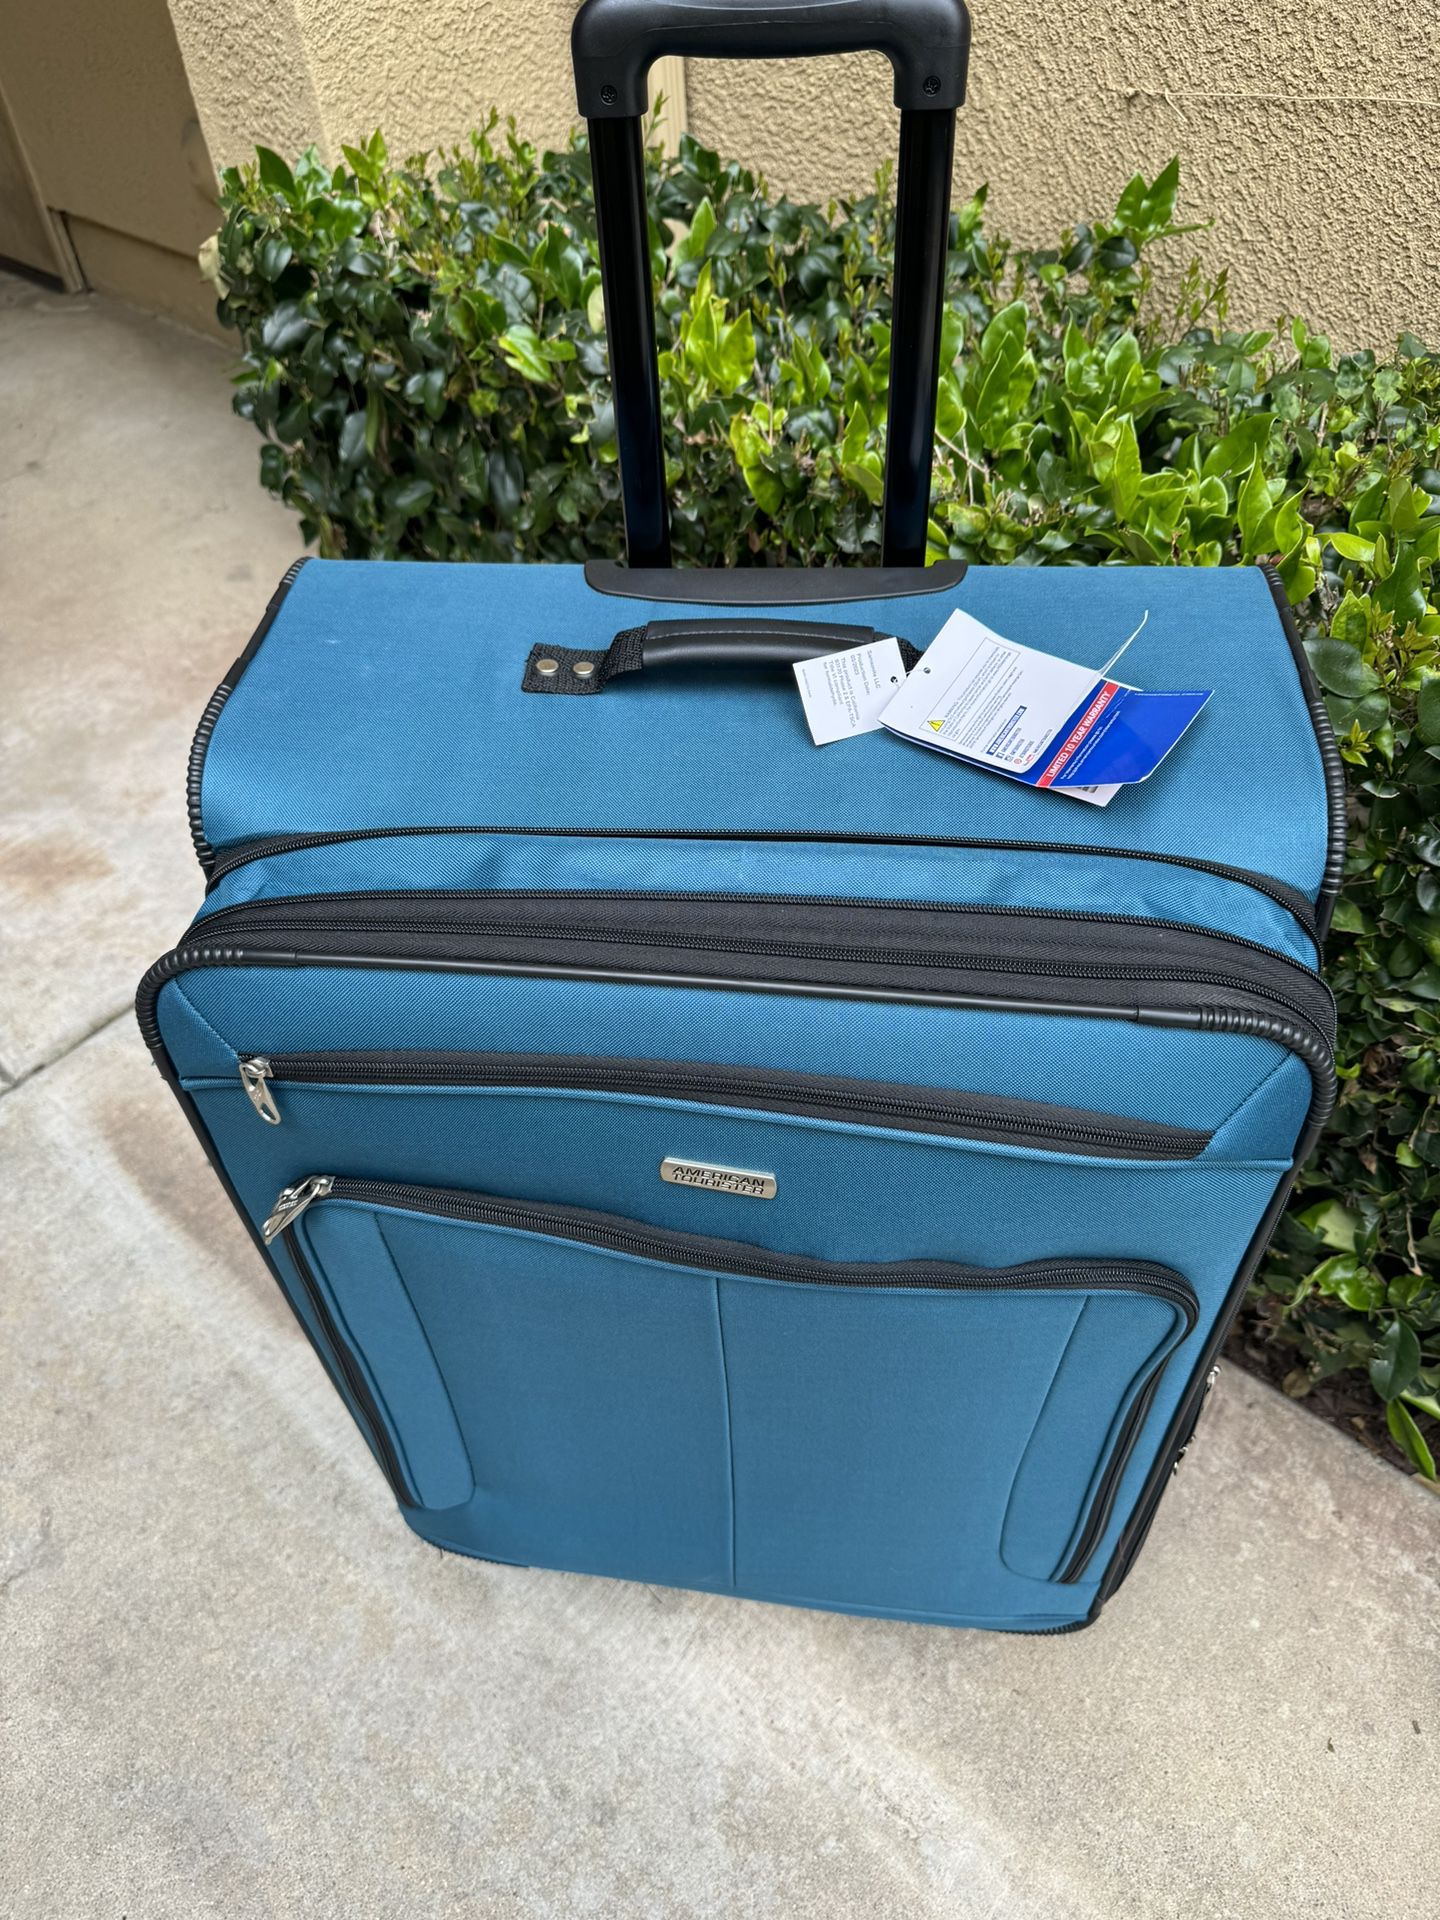 American Tourister Large Luggage 